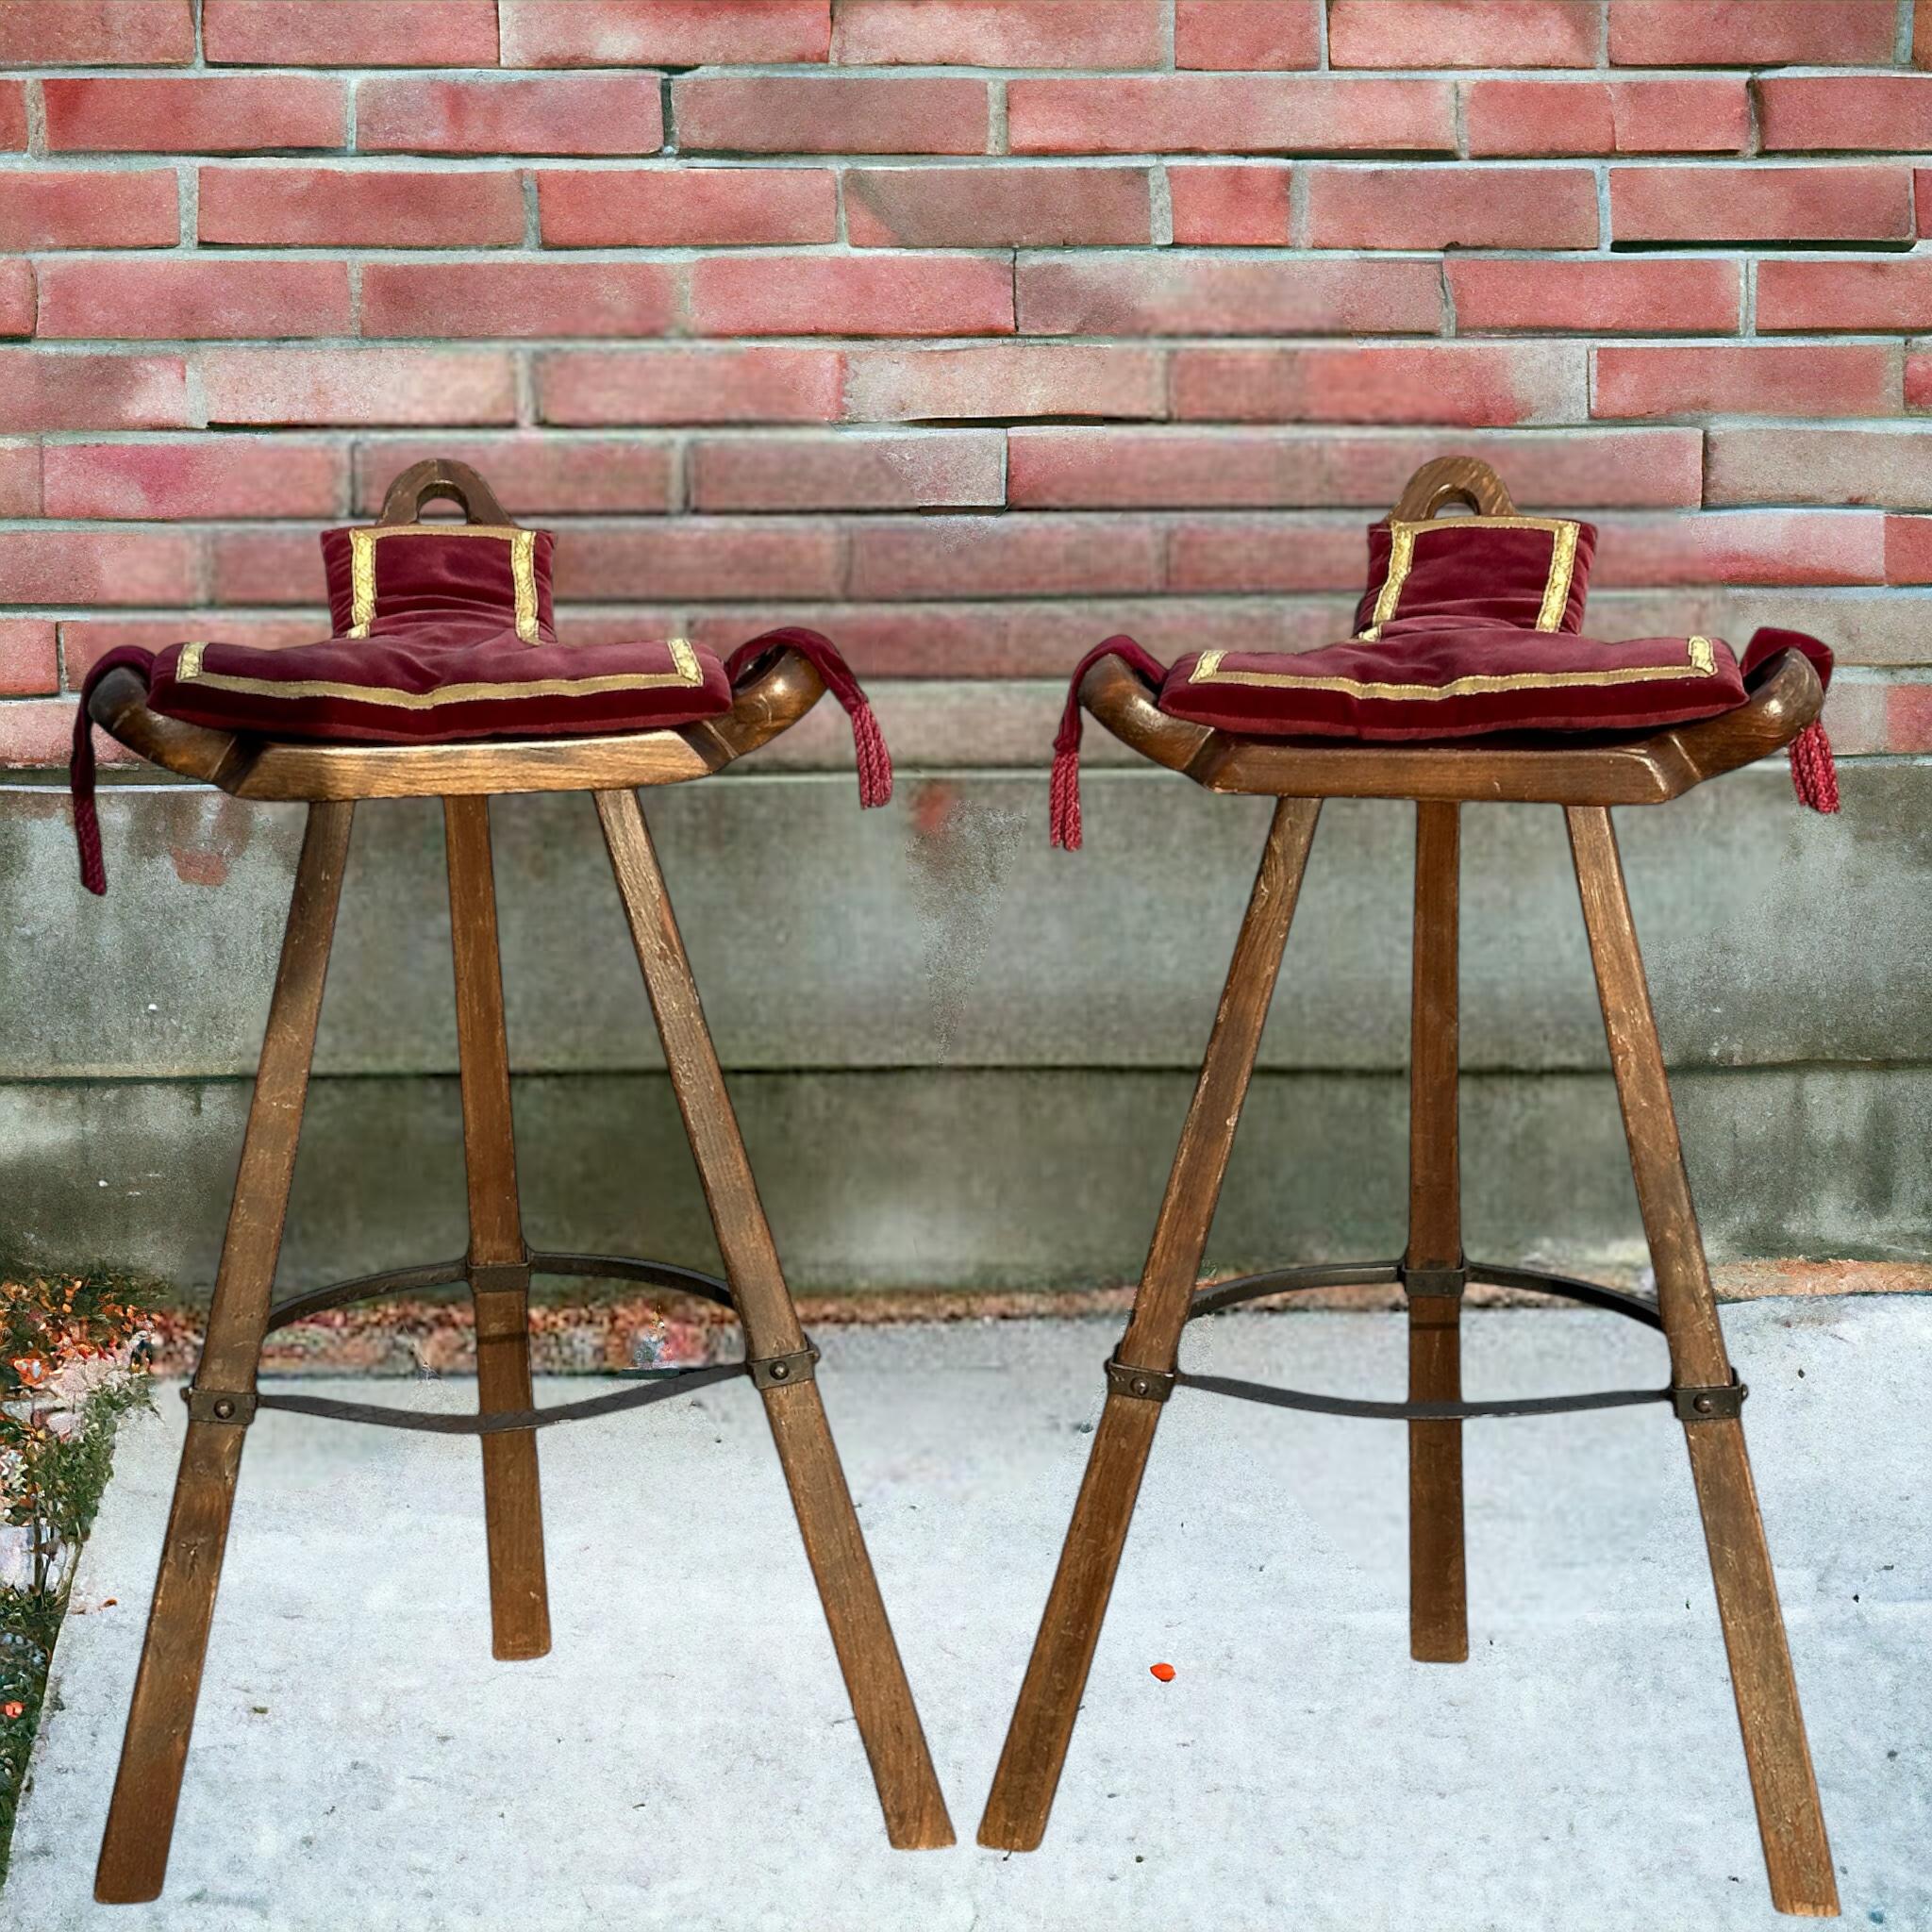 A gorgeous set of Brutalist bar stools. Set of two 'Brutalist' or 'Marbella' bar stools, in wood and metal, Spain, 1970s. A curved T-shape with three handles. The curved form makes sure the stool has a stabile seat, emphasized by the metal ring as